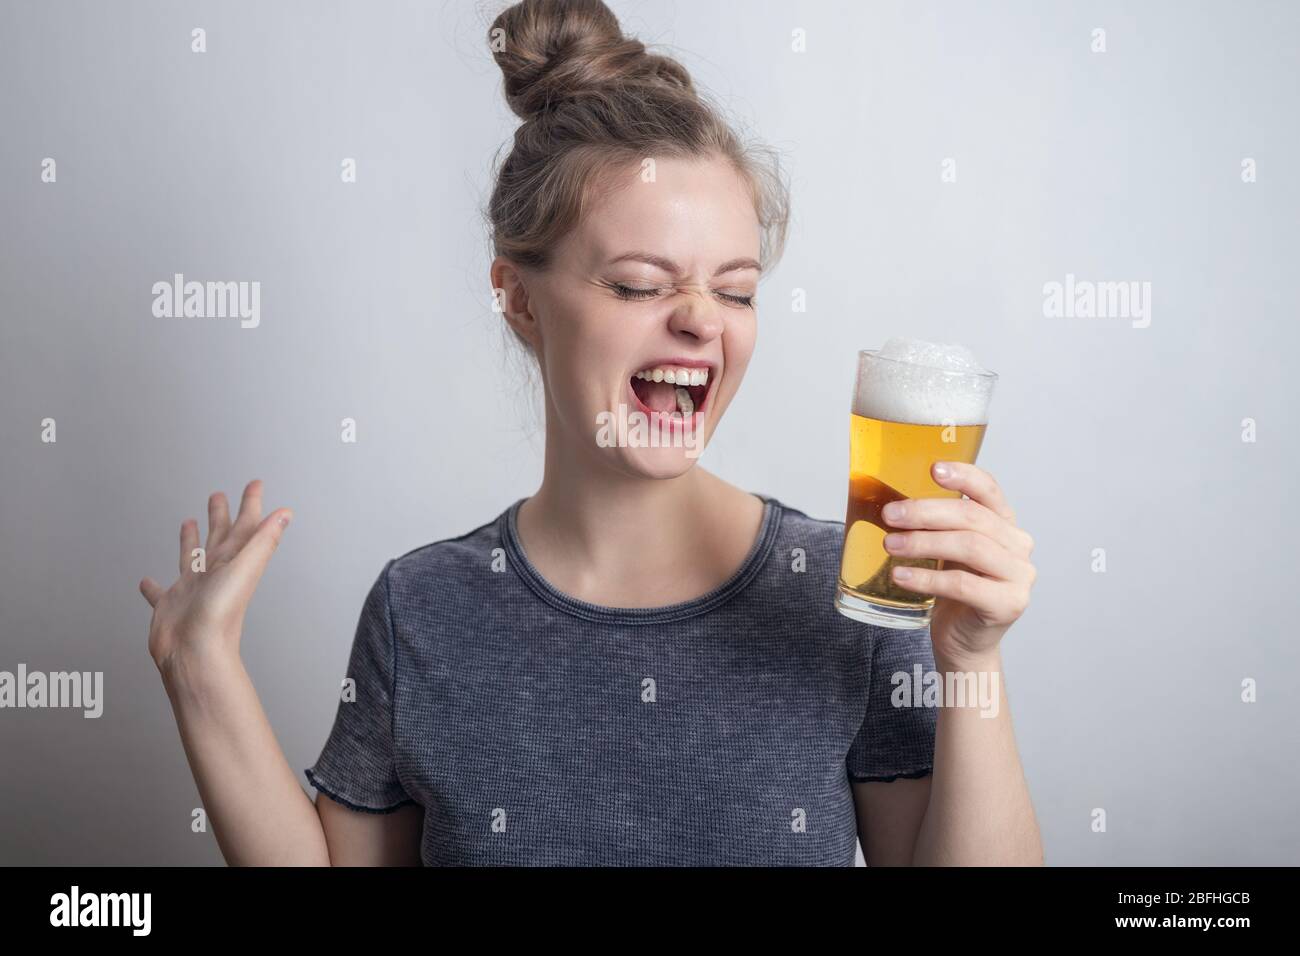 Laughing smiling young caucasian woman girl with glass of beer Stock Photo